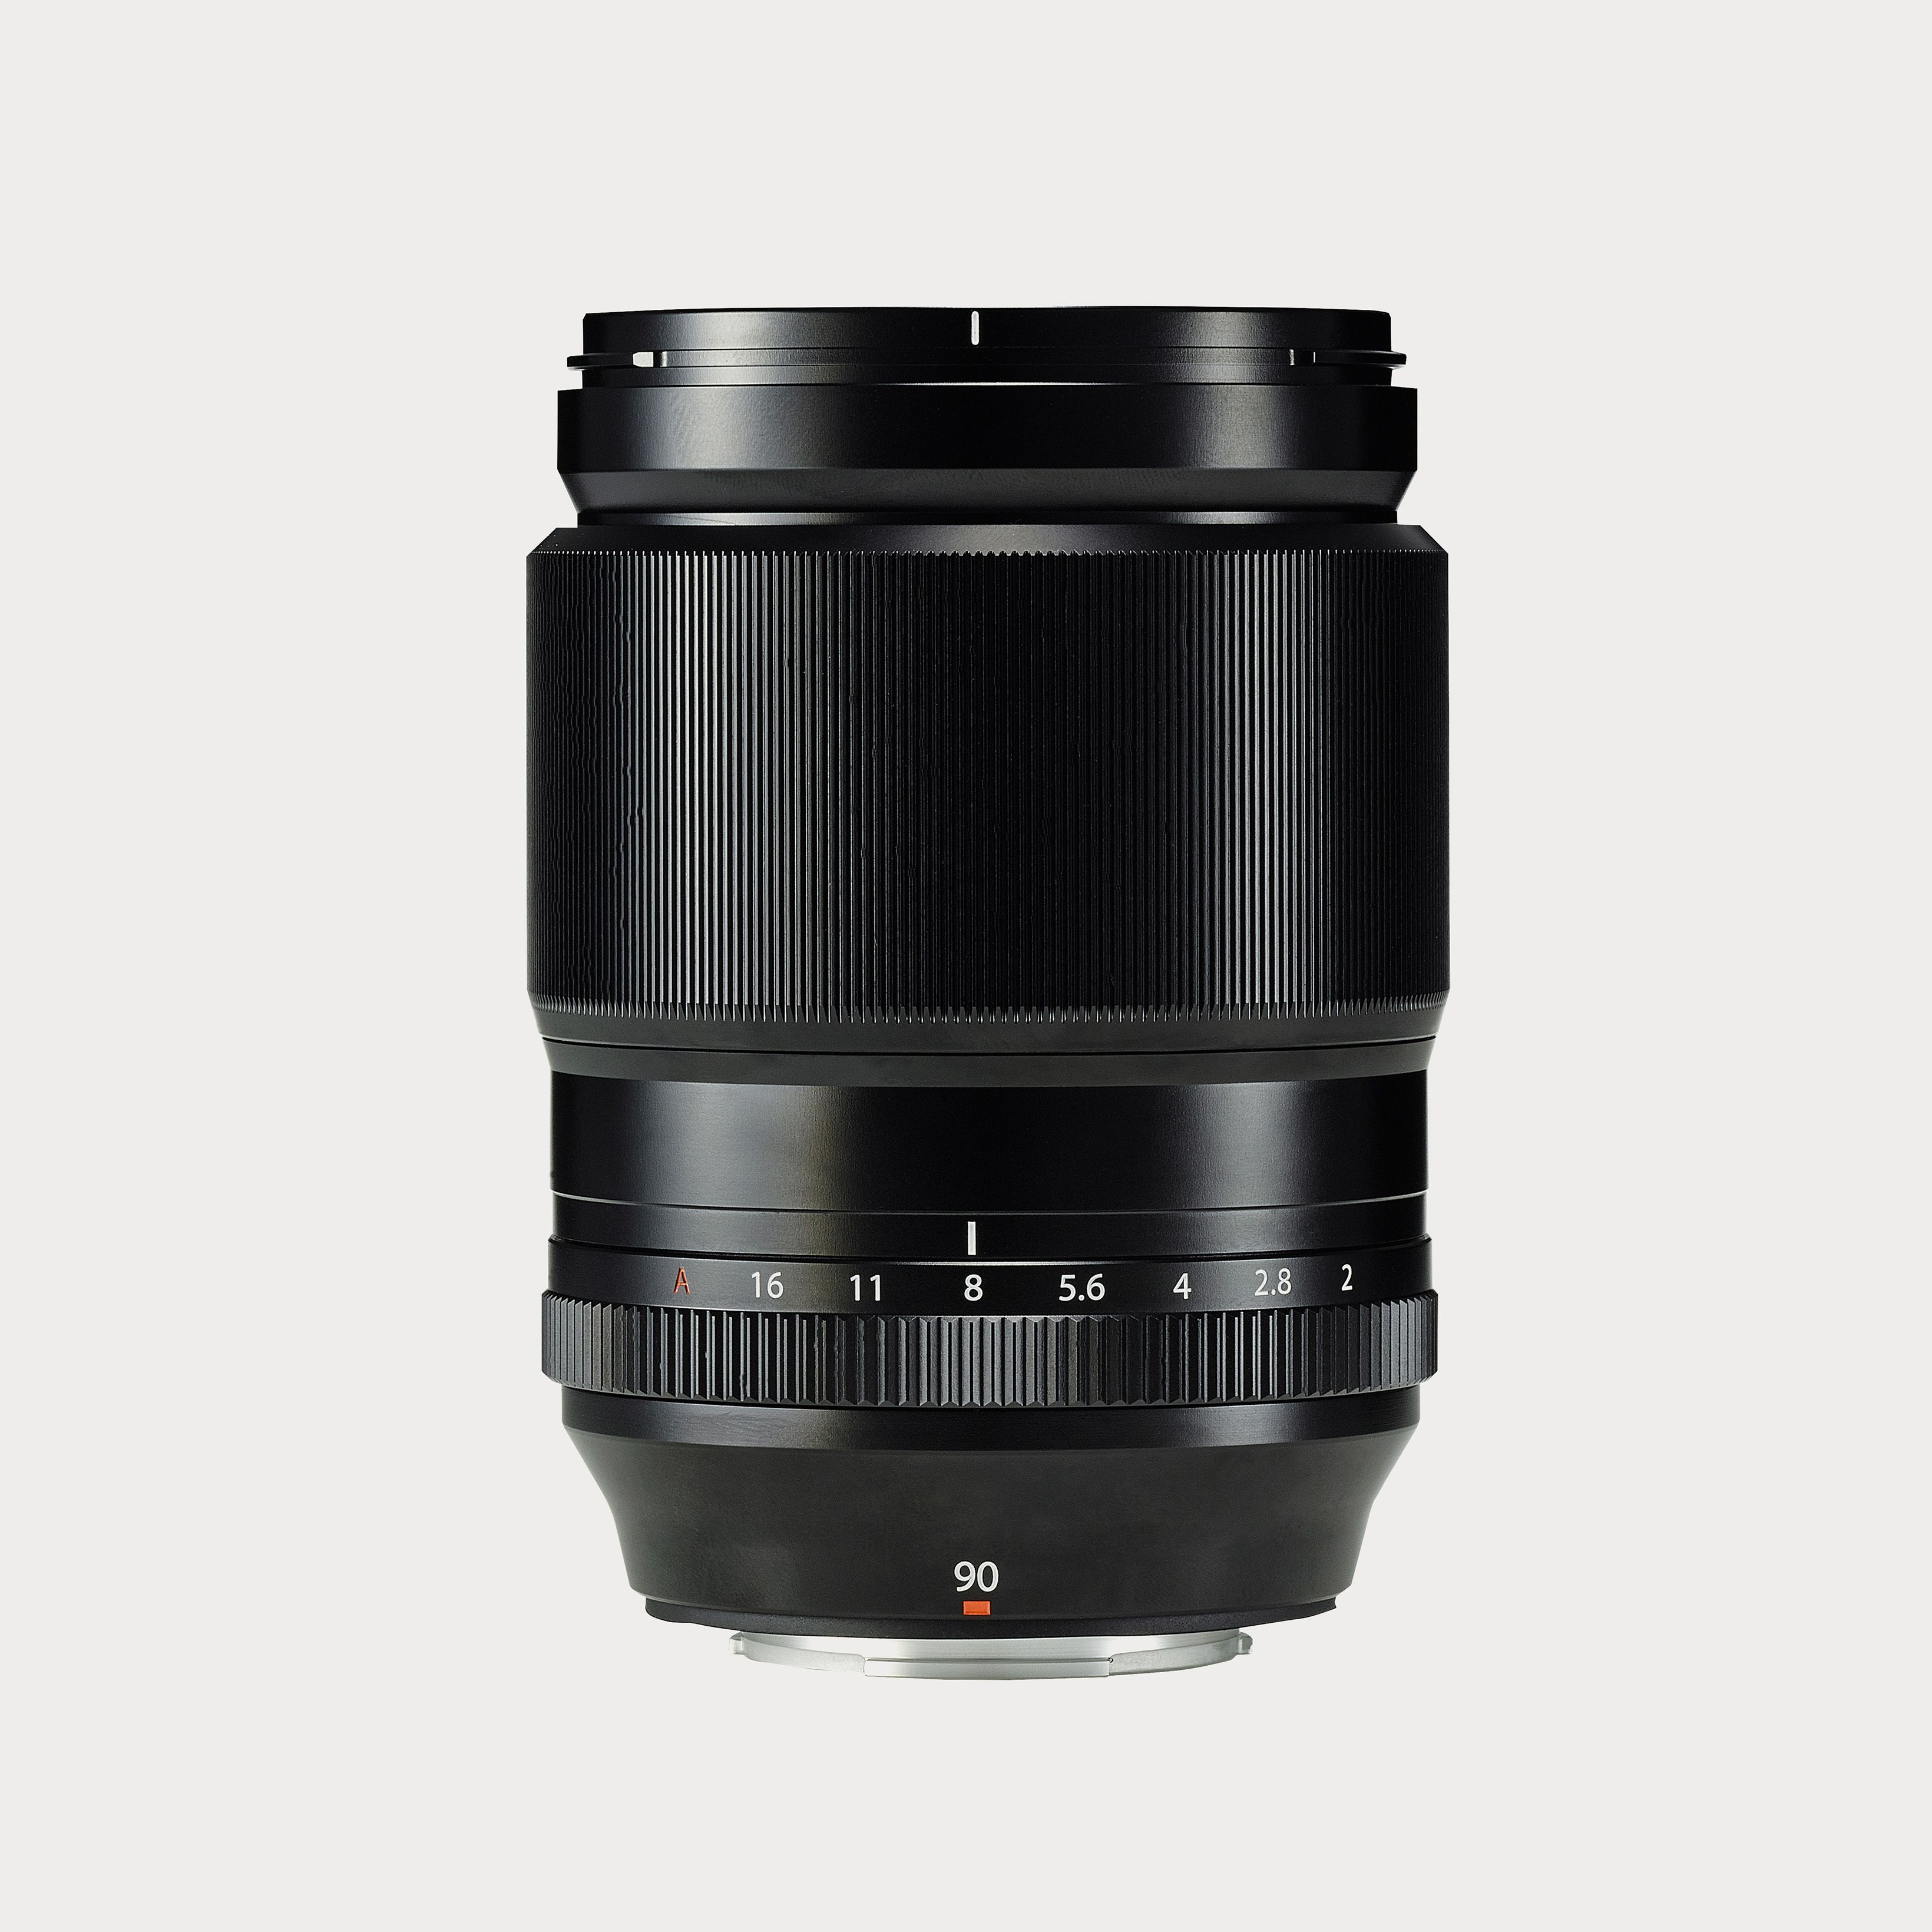 XF 90mm F2 R LM WR Lens | Moment